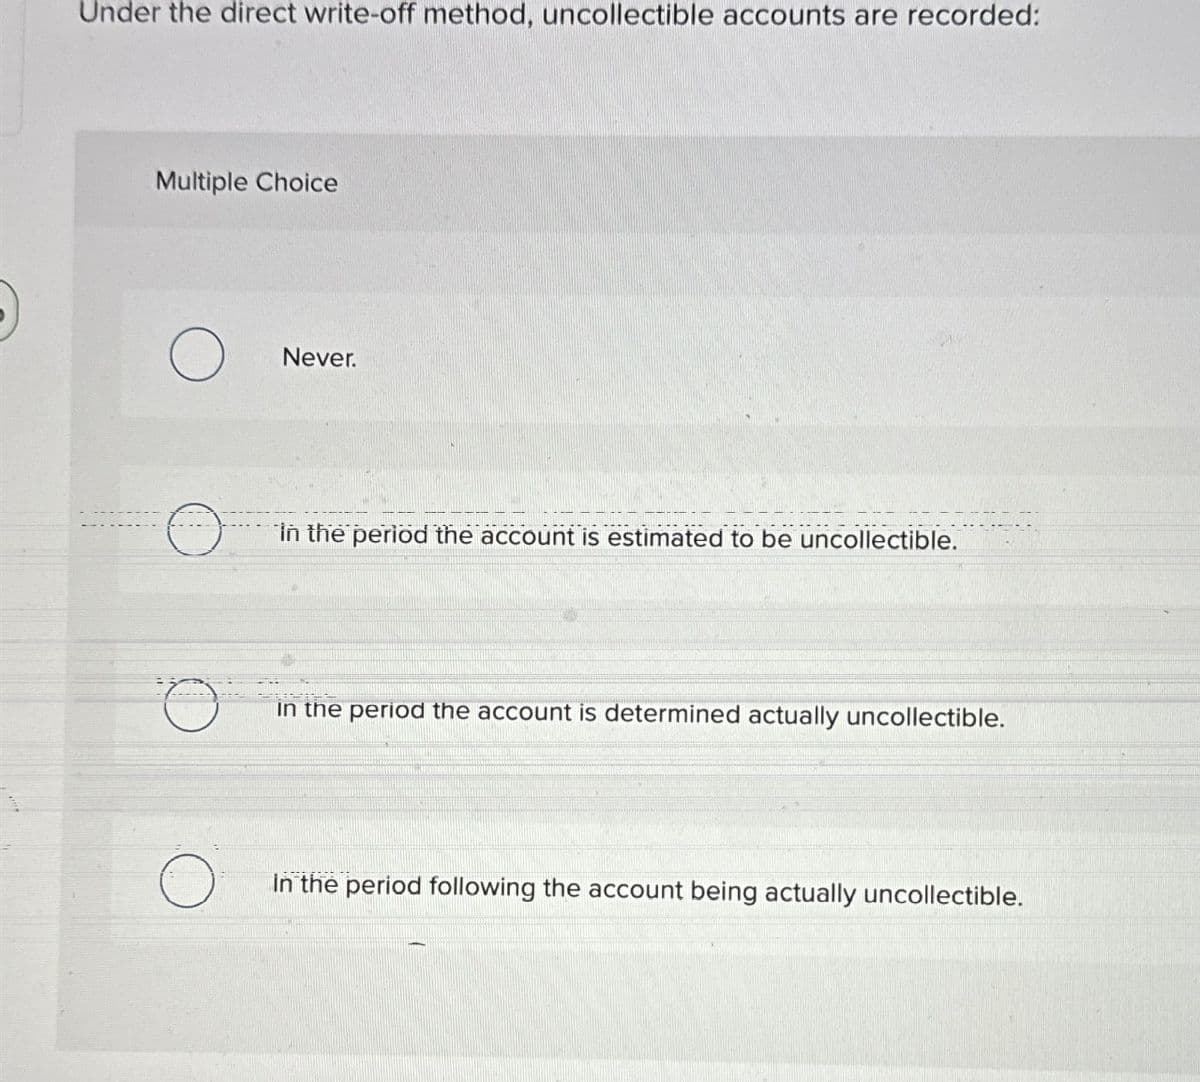 Under the direct write-off method, uncollectible accounts are recorded:
Multiple Choice
Never.
in the period the account is estimated to be uncollectible.
BAISE
in the period the account is determined actually uncollectible.
in the period following the account being actually uncollectible.